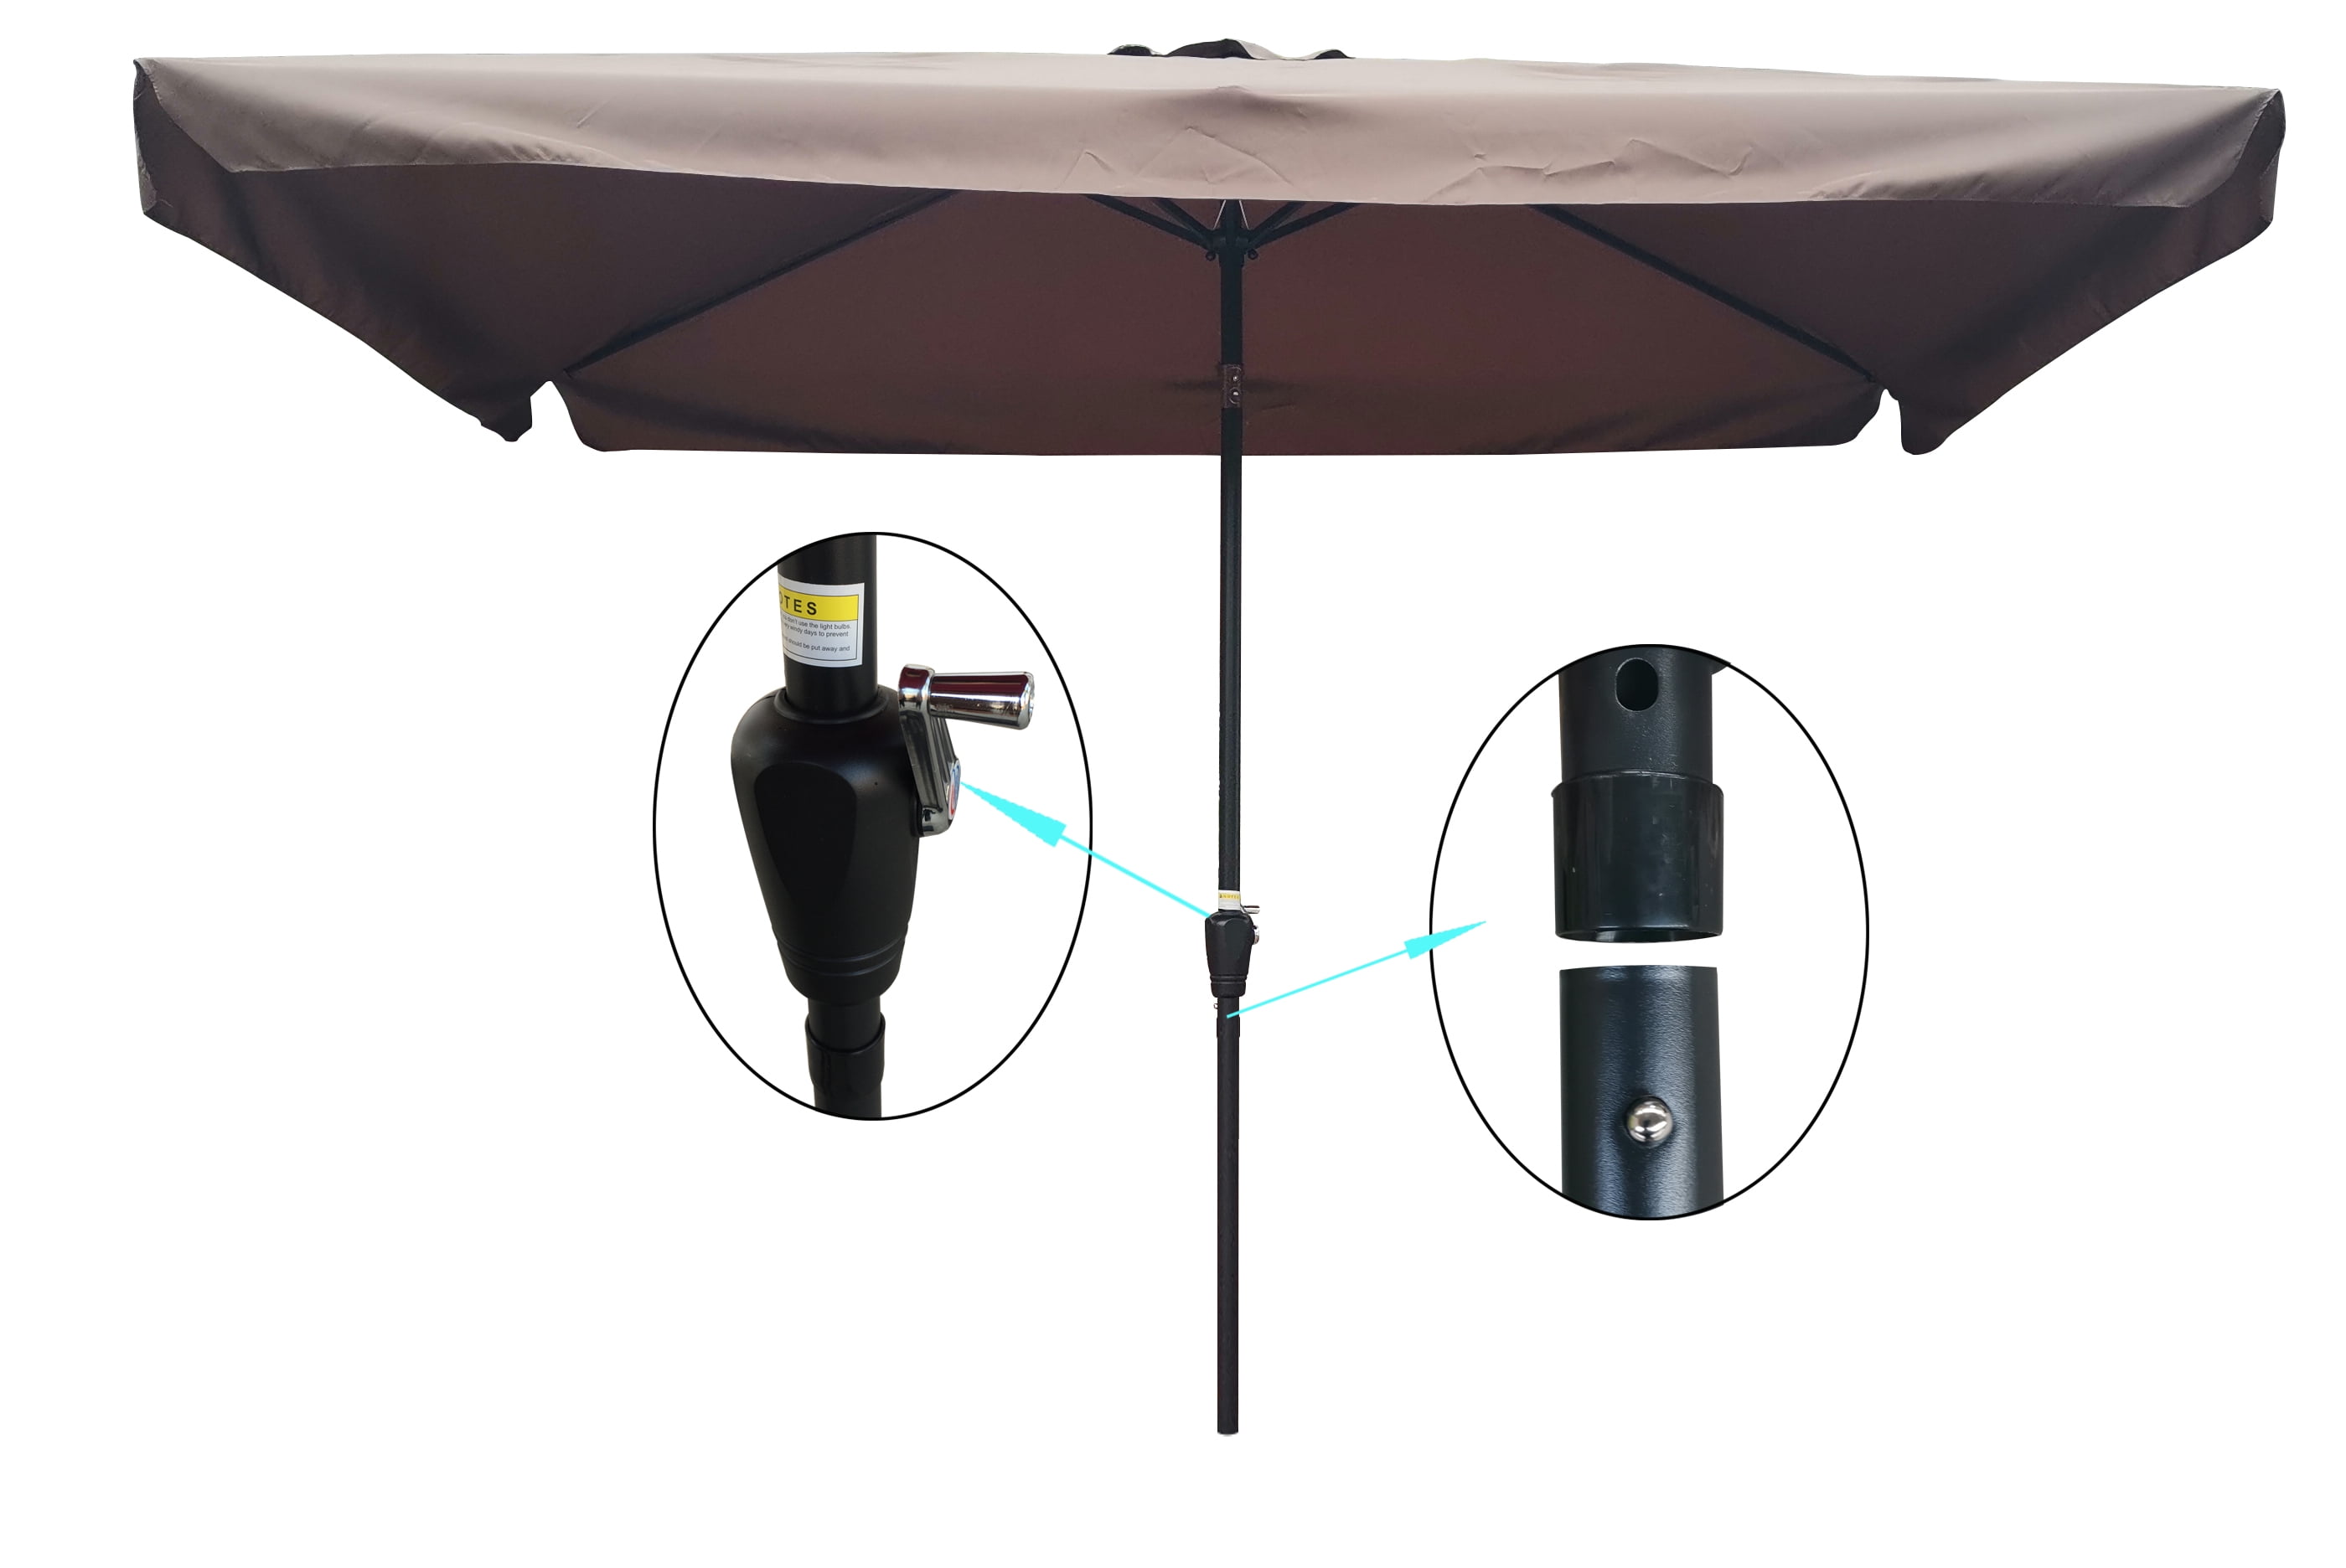 Dalset Search engine marketing complement 10x6.5 FT Rectangular Table Umbrella Outdoor Patio Umbrella with Crank and  Push Button Tilt, for Garden Swimming Pool - Burgundy - Walmart.com